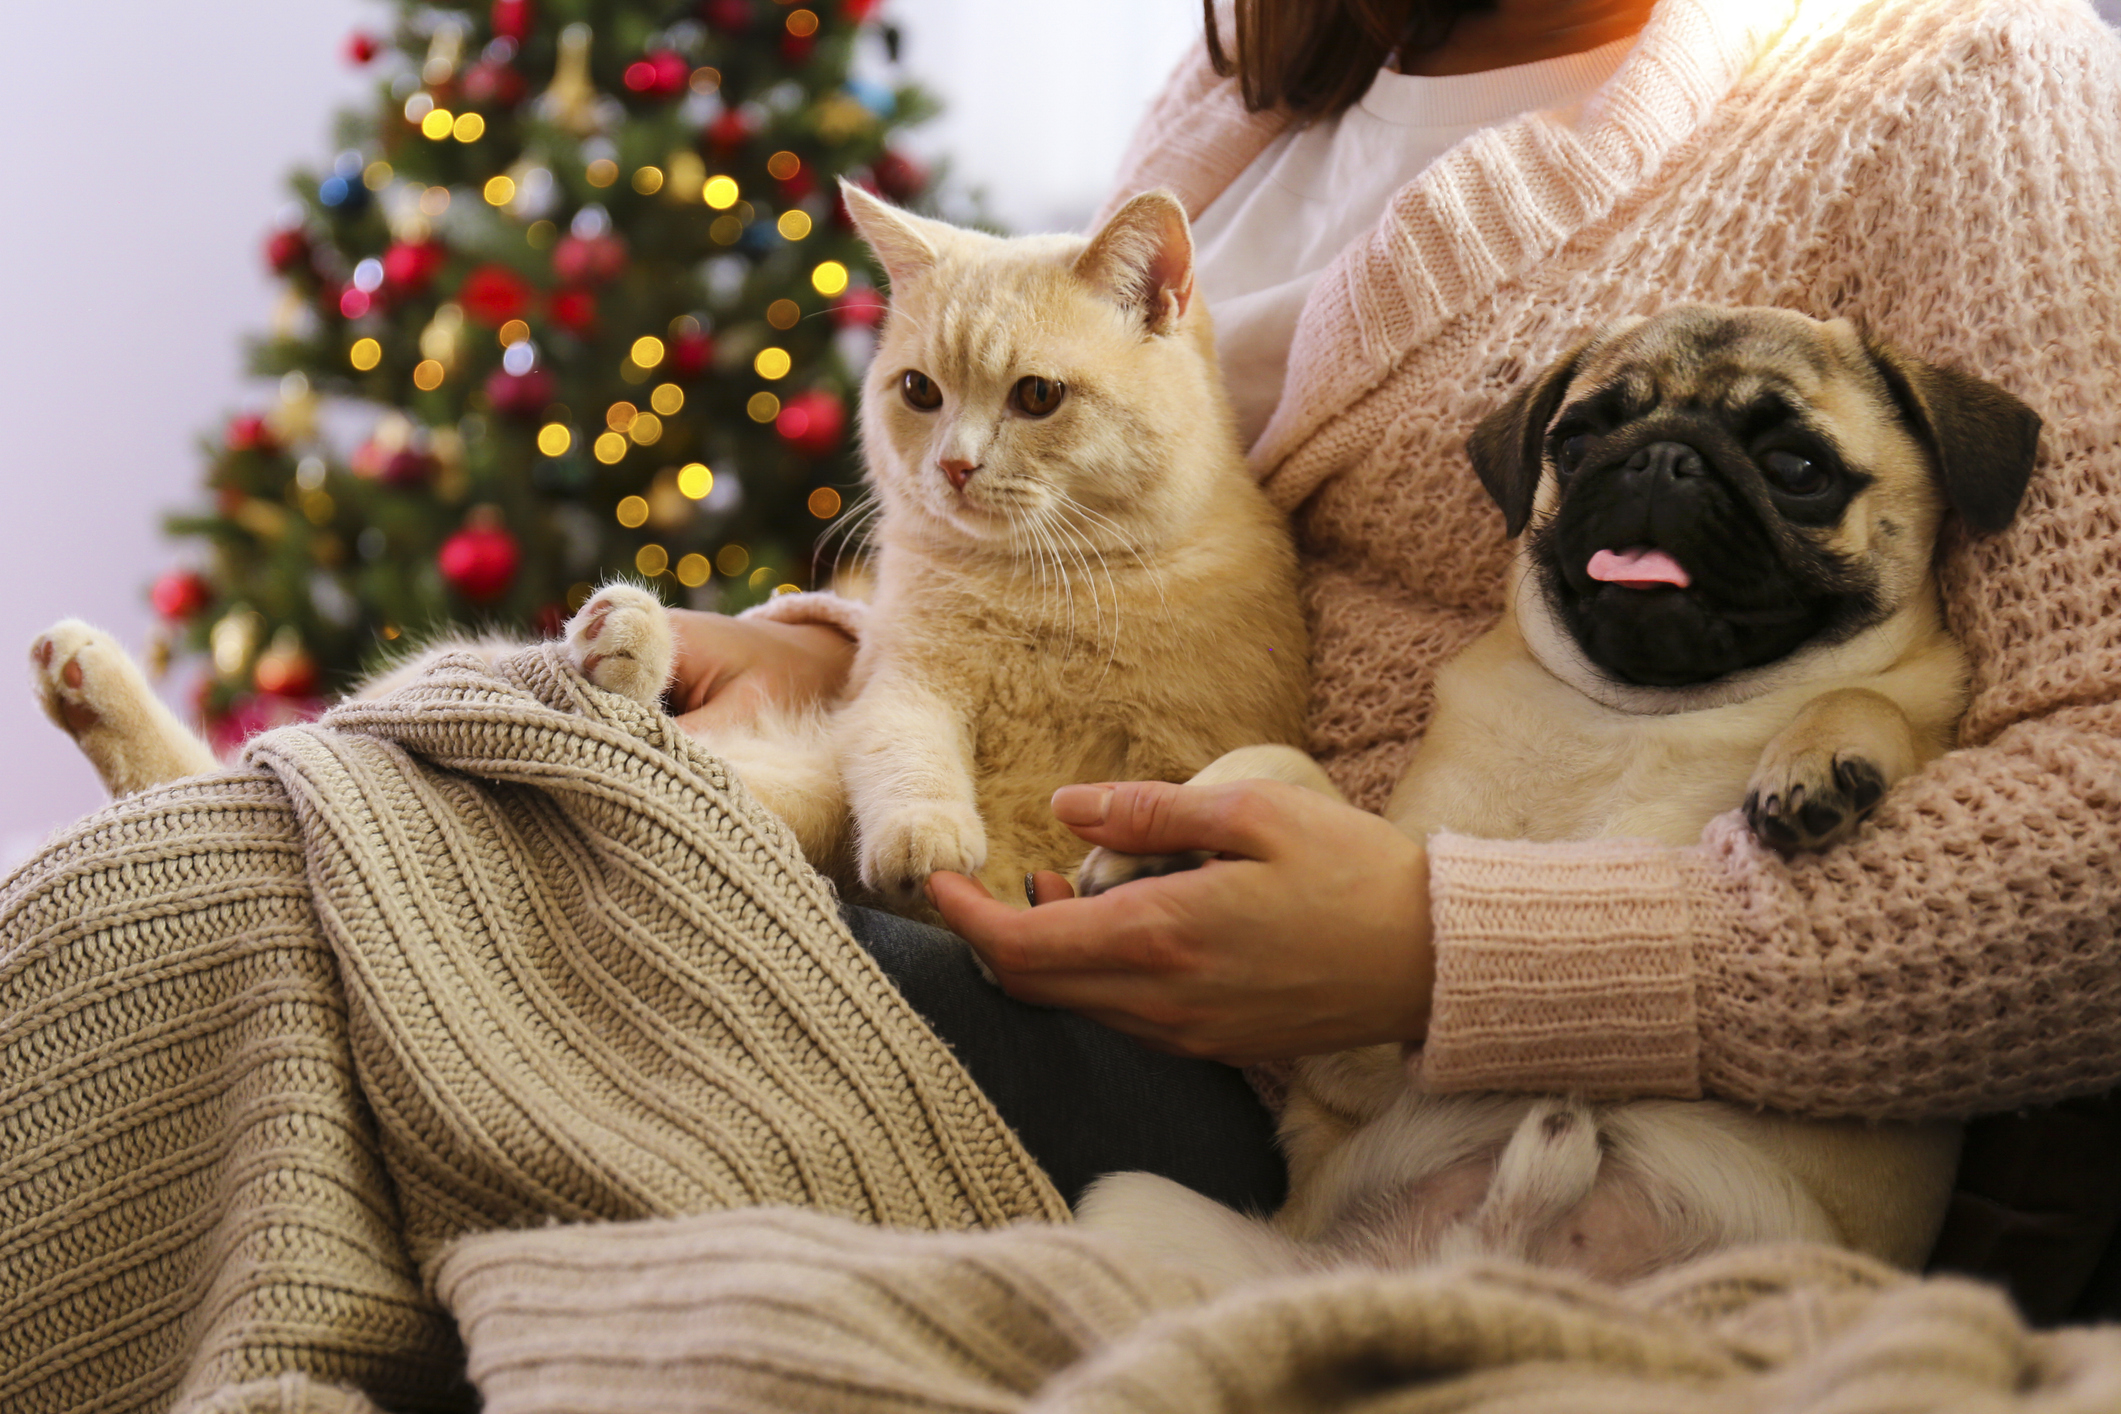 Pug and orange cat cuddling in pet parent’s lap in front of a Christmas tree